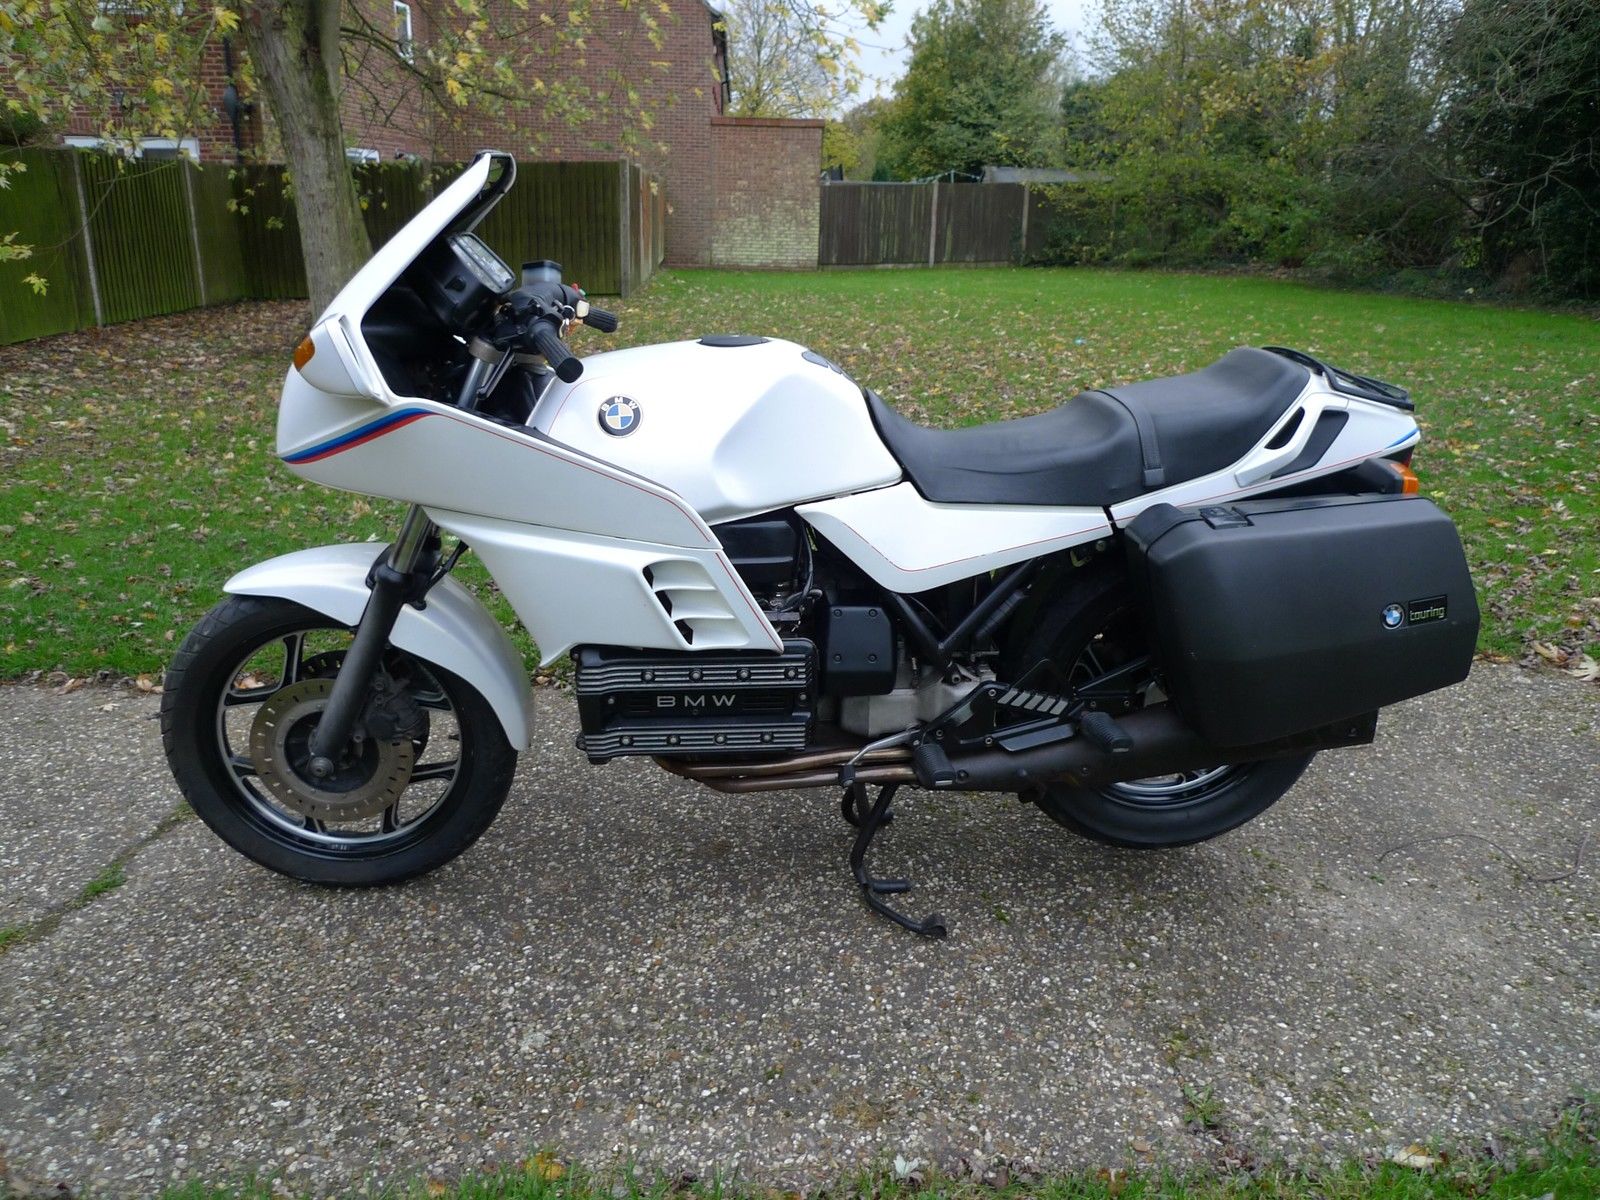 Bmw k 100 rs - abcdef.wiki